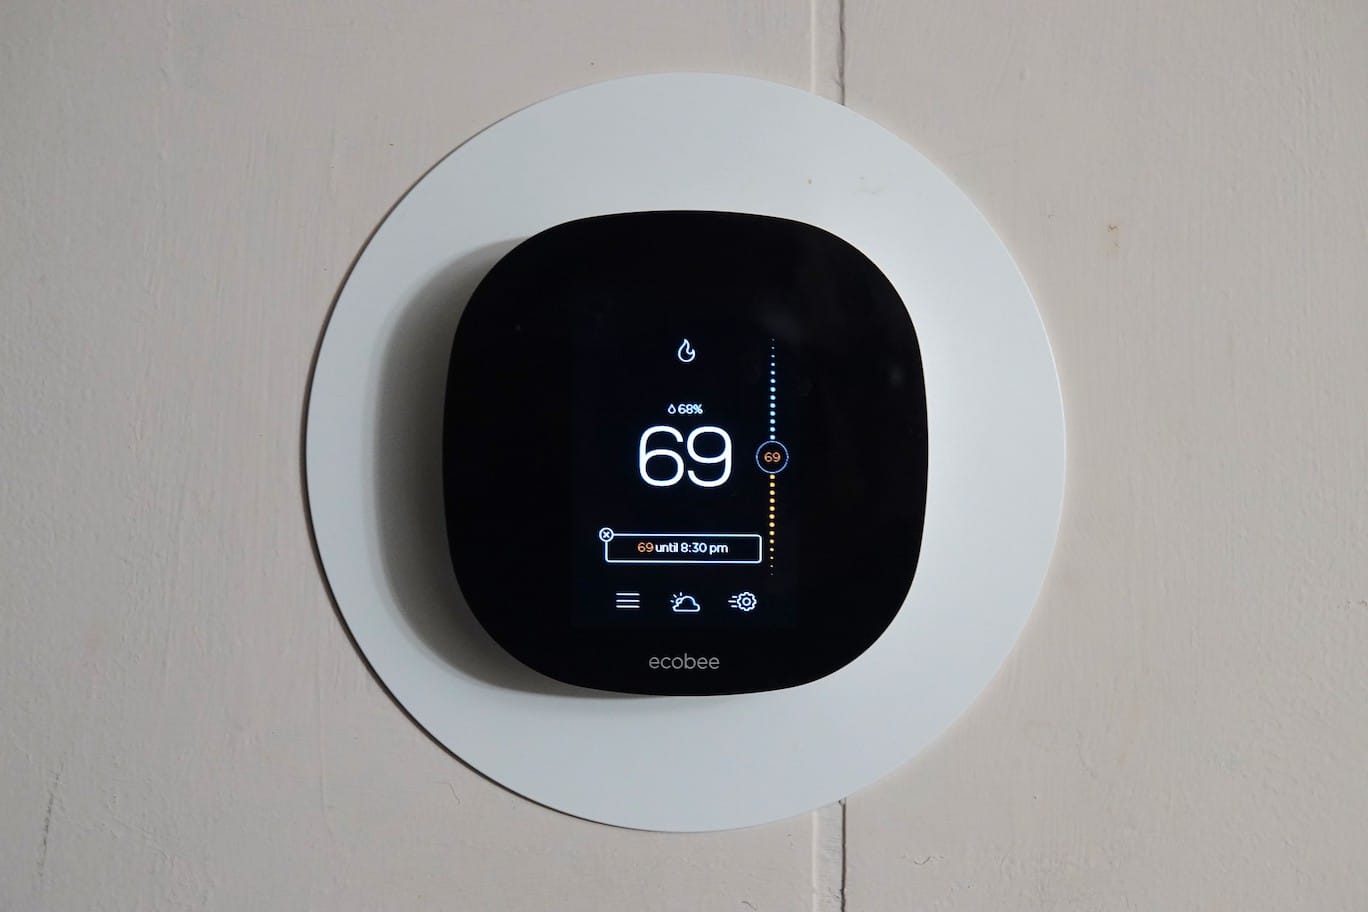 A square-shaped smart thermostat depicting a home’s indoor temperature.